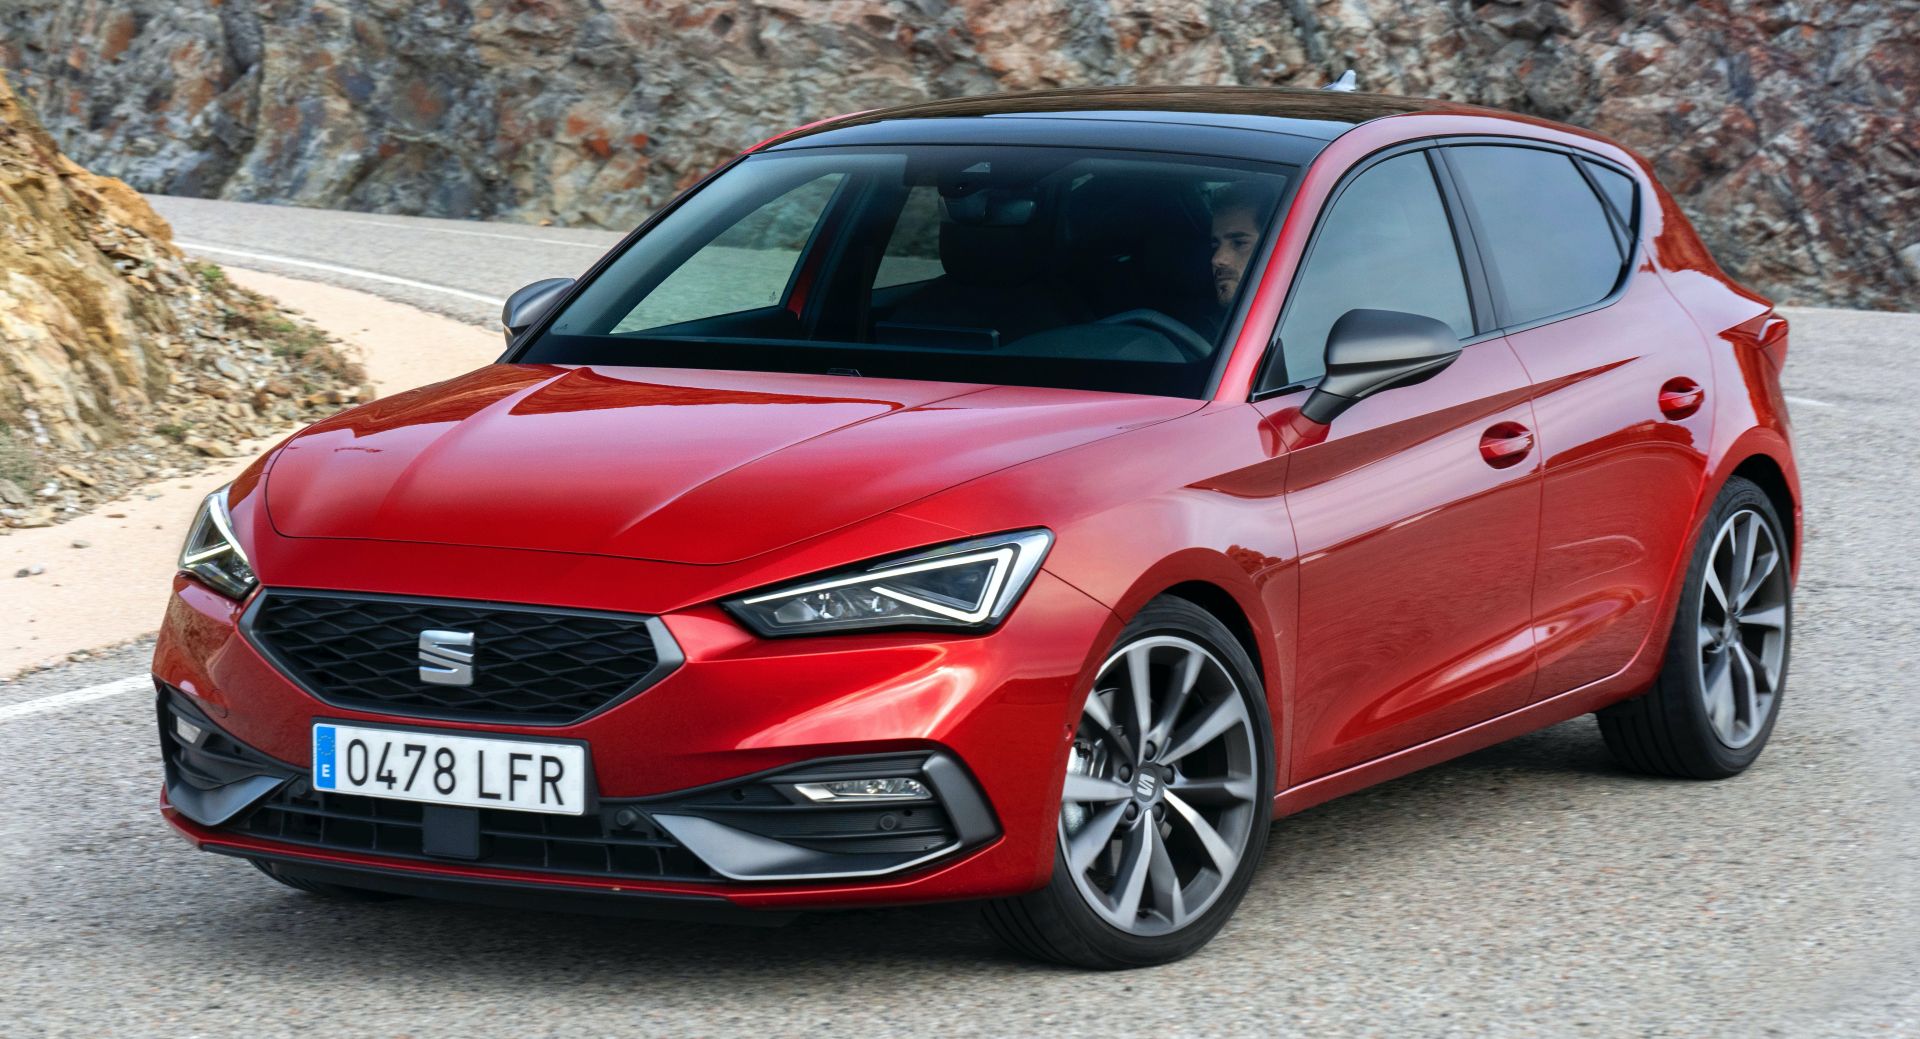 2020 SEAT Leon Detailed In 140 Photos, Offers The Most Diverse Lineup